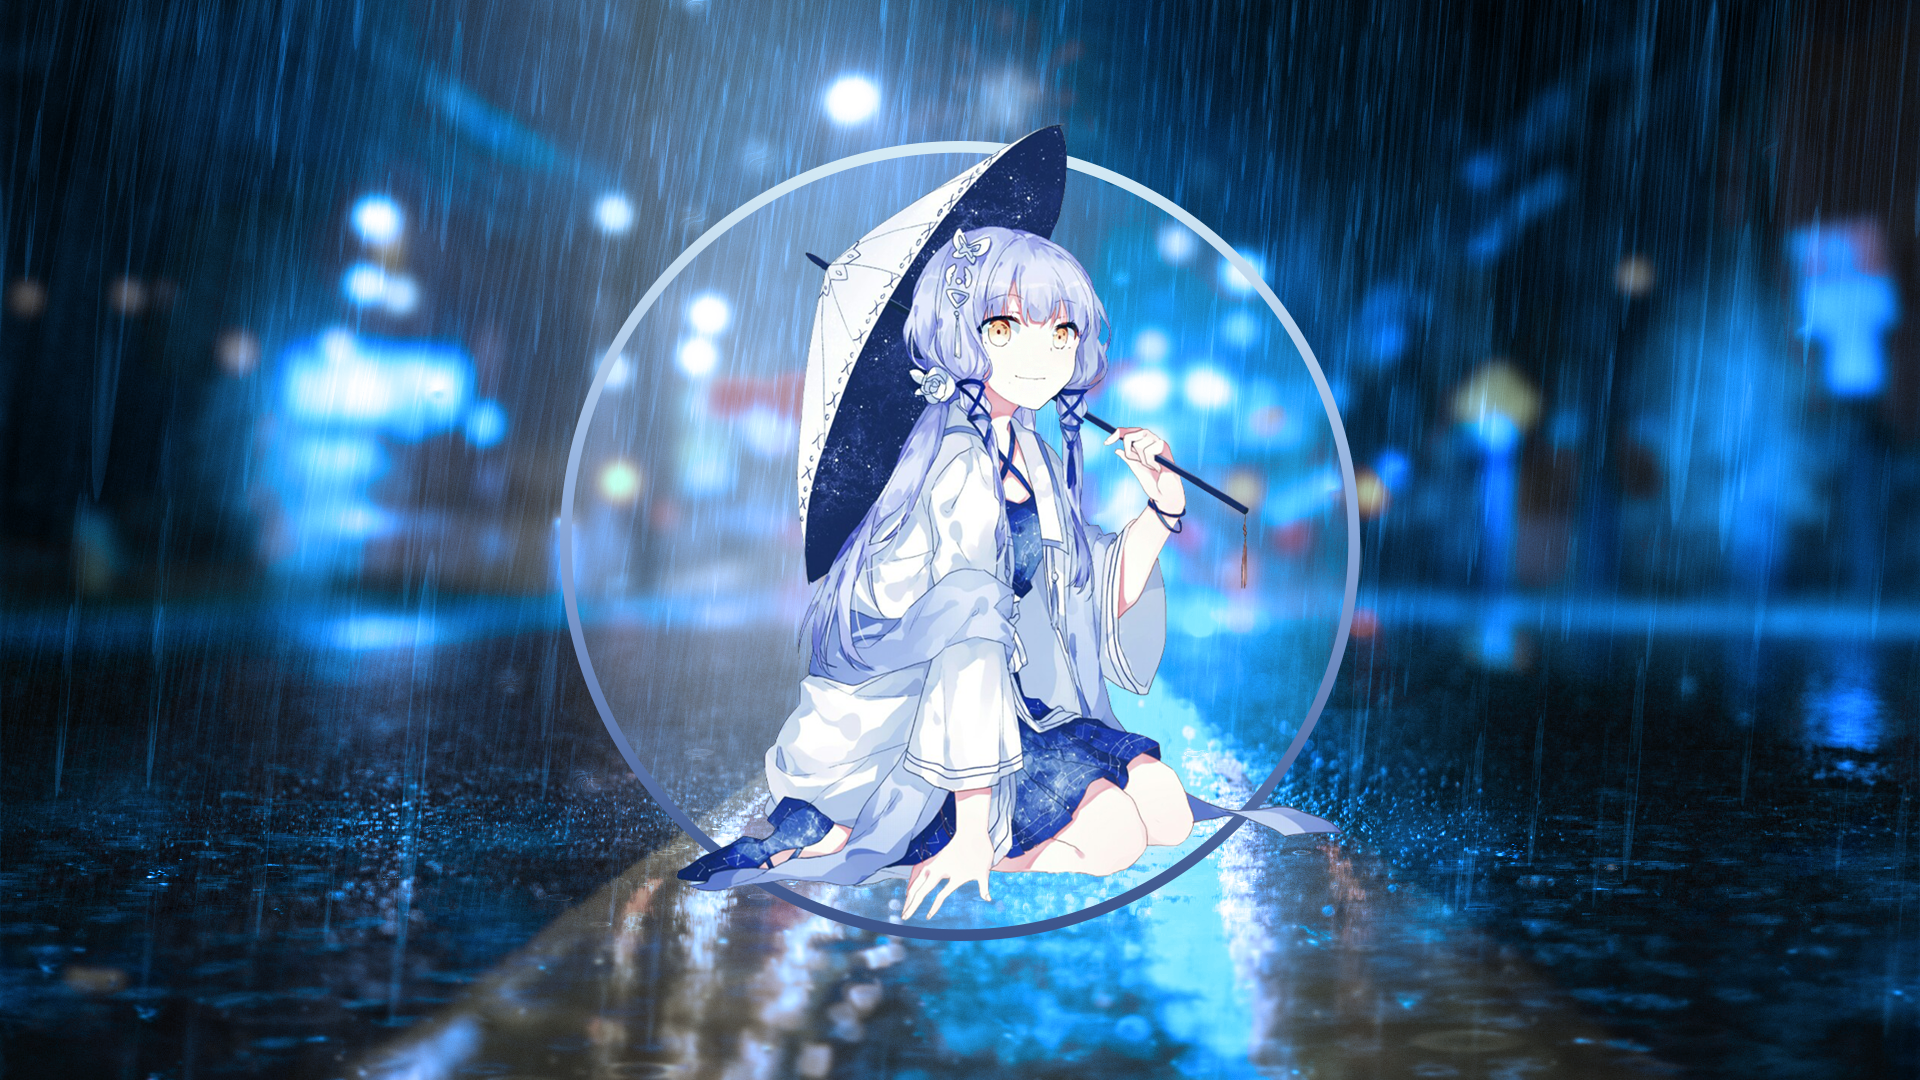 Picture In Picture Anime Girls Anime Rain Vocaloid Stardust Vocaloid Umbrella Blue Hair Yellow Eyes 1920x1080